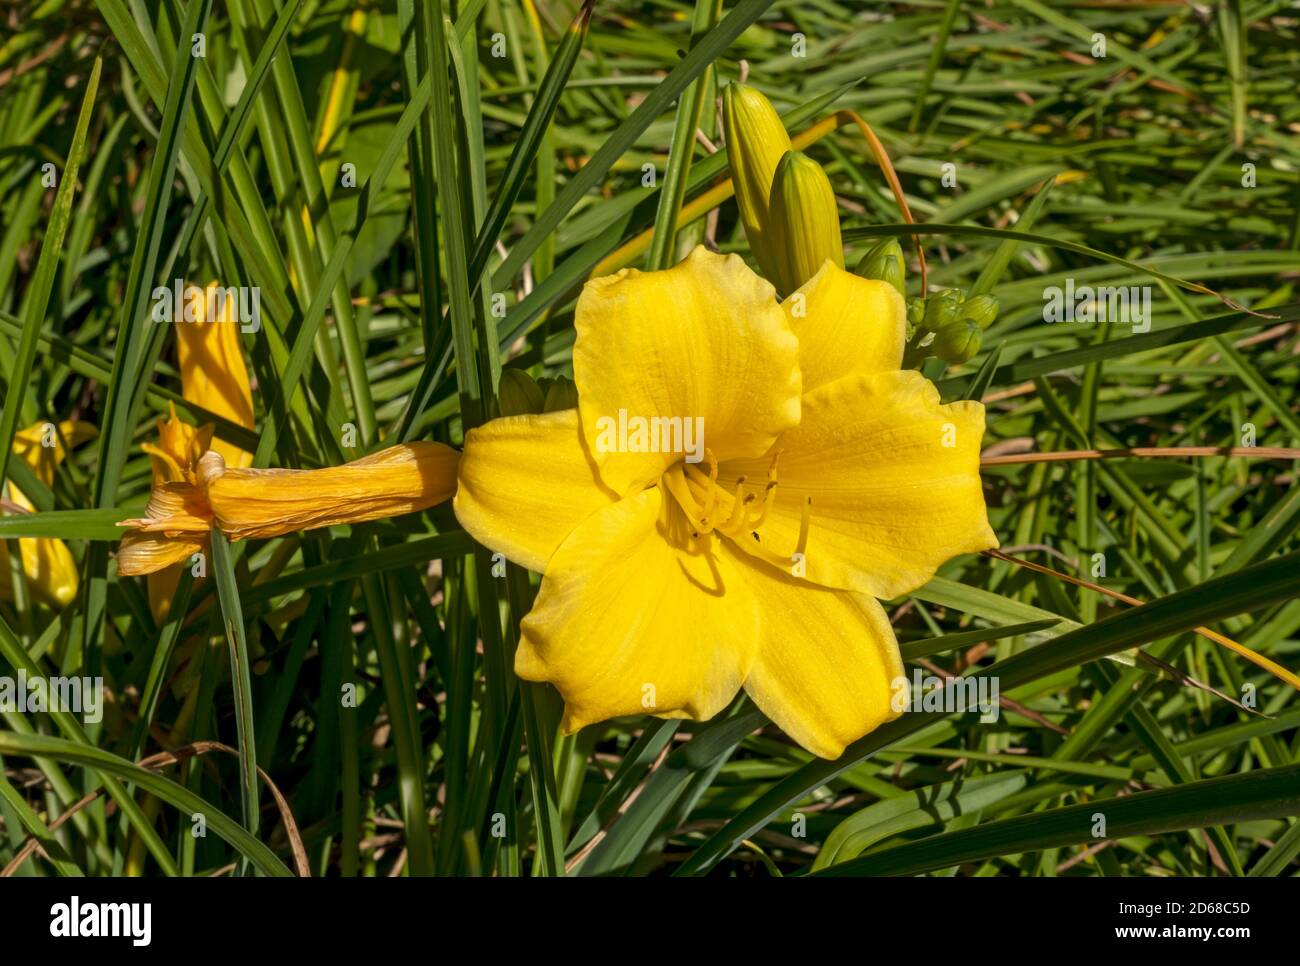 Close up of yellow day lily daylily (Hemerocallis) flower flowers growing in a garden England UK United Kingdom GB Great Britain Stock Photo